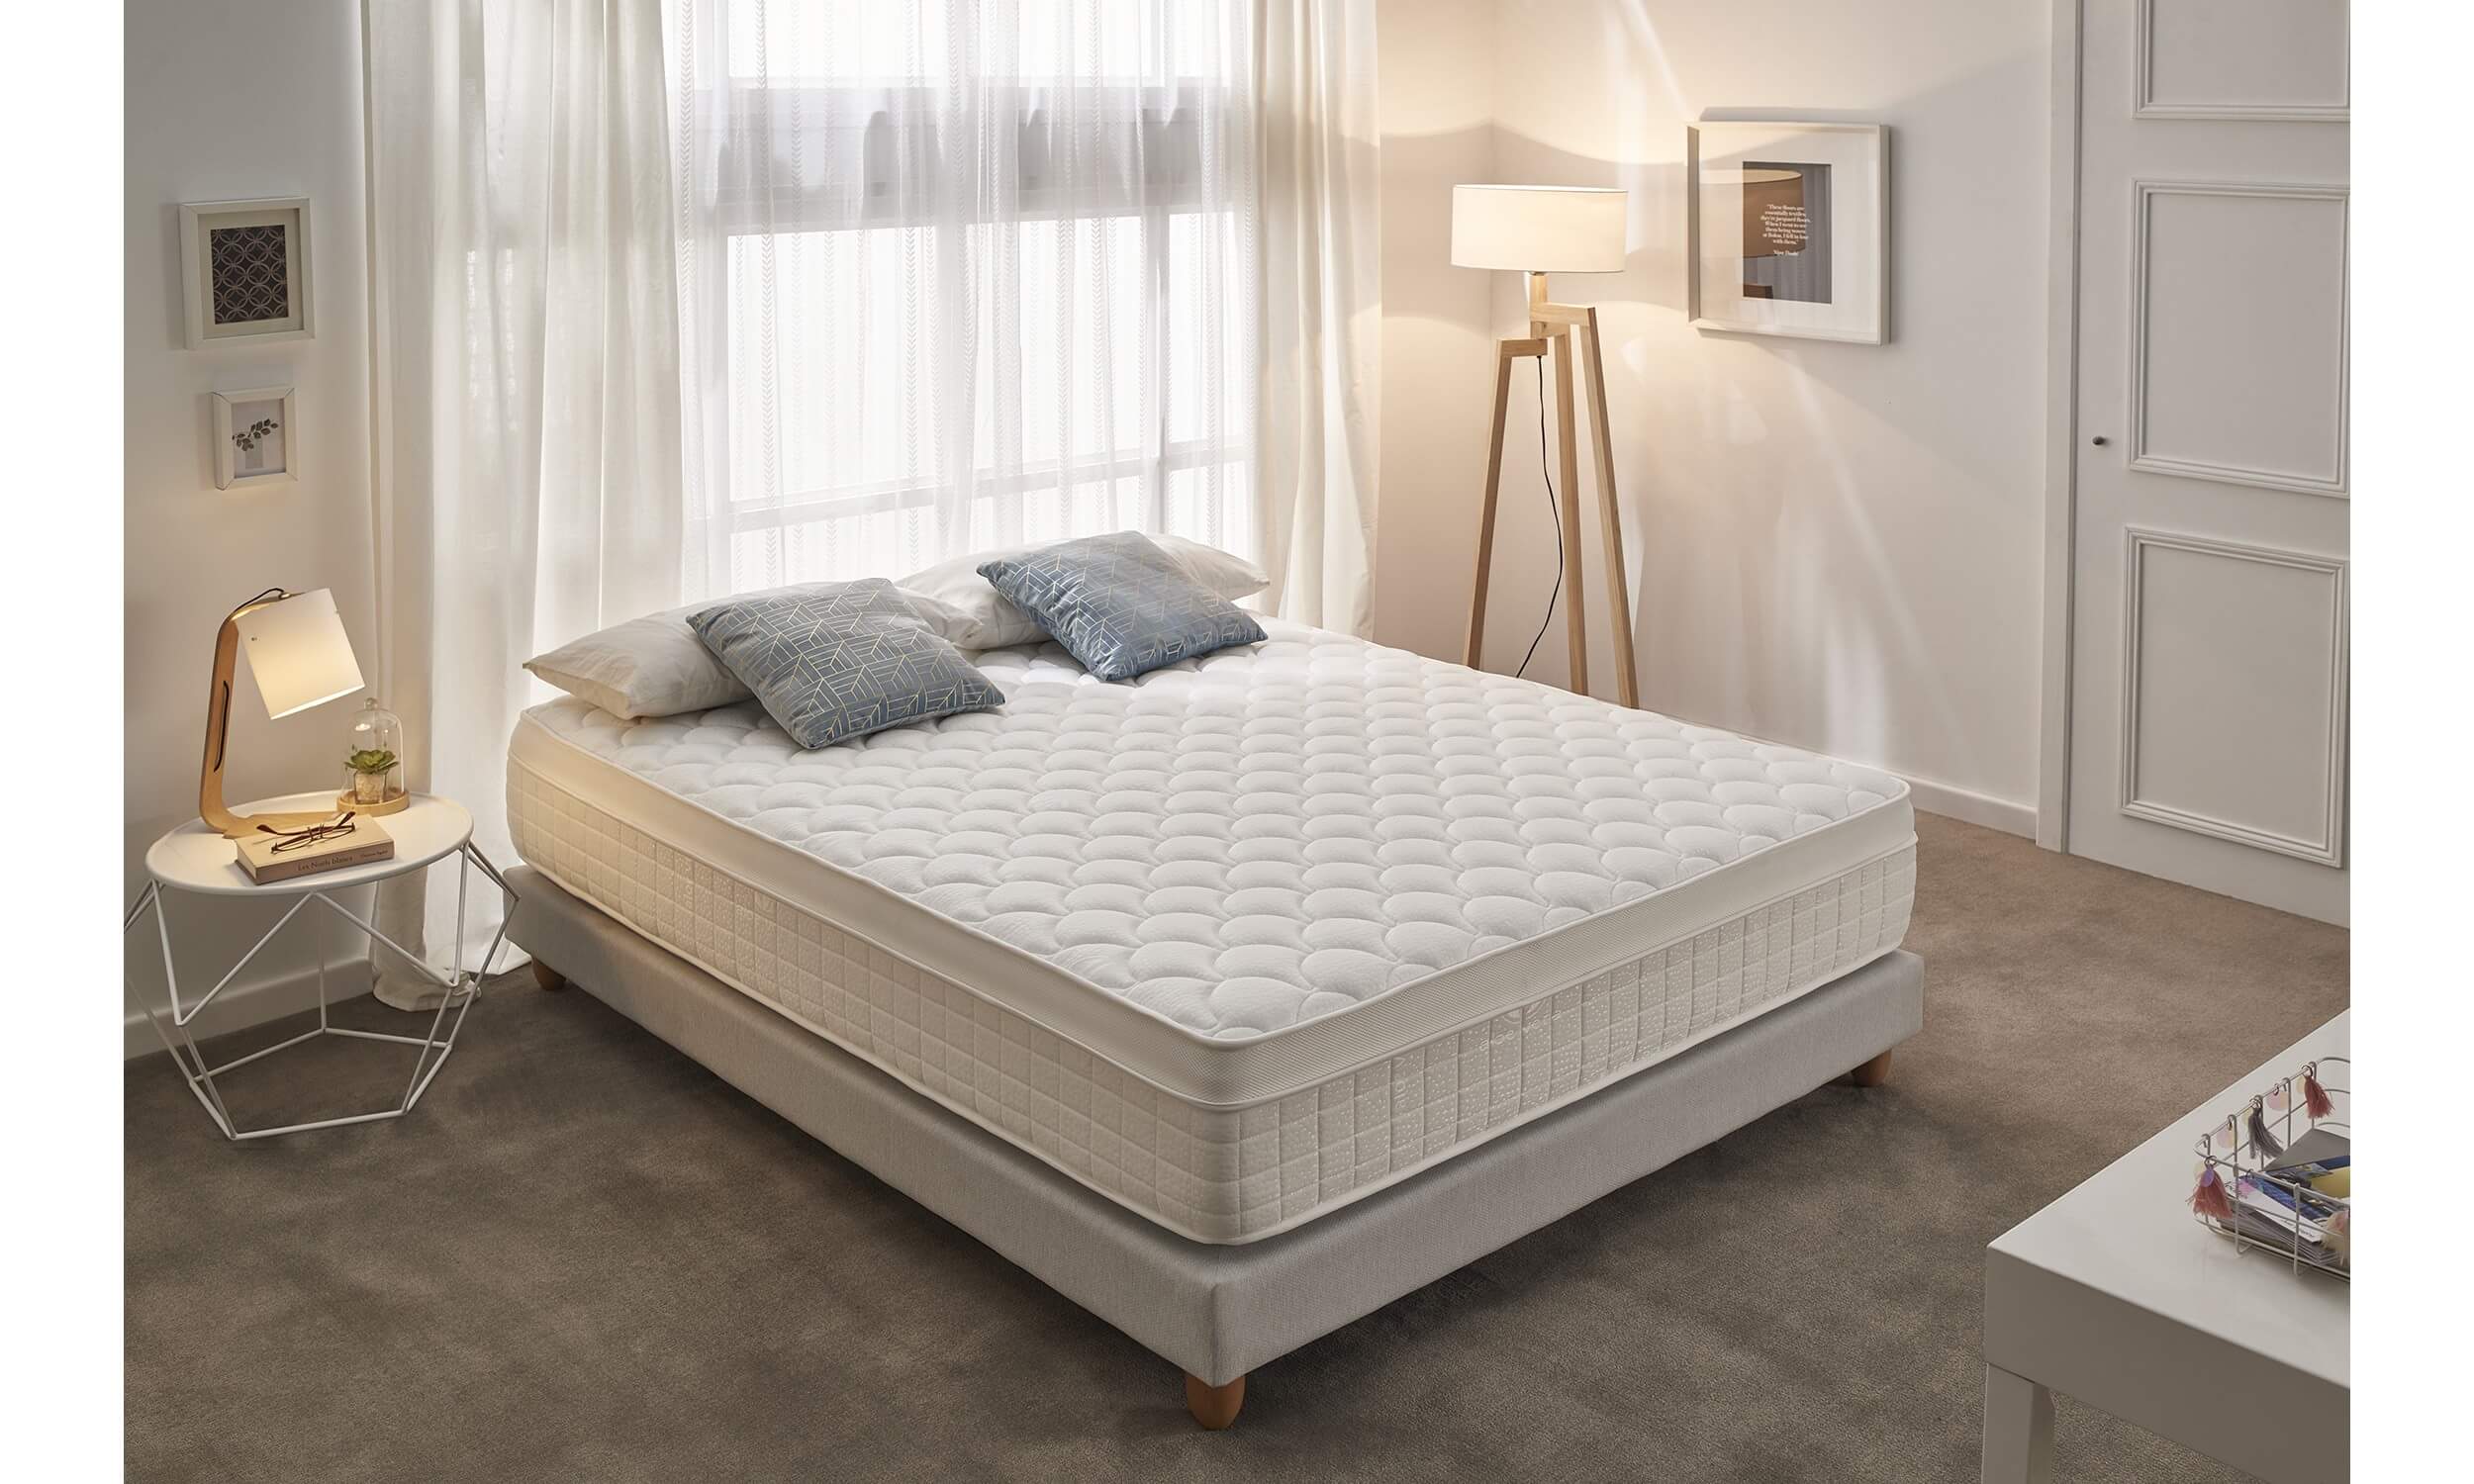 mattress on frame without box spring